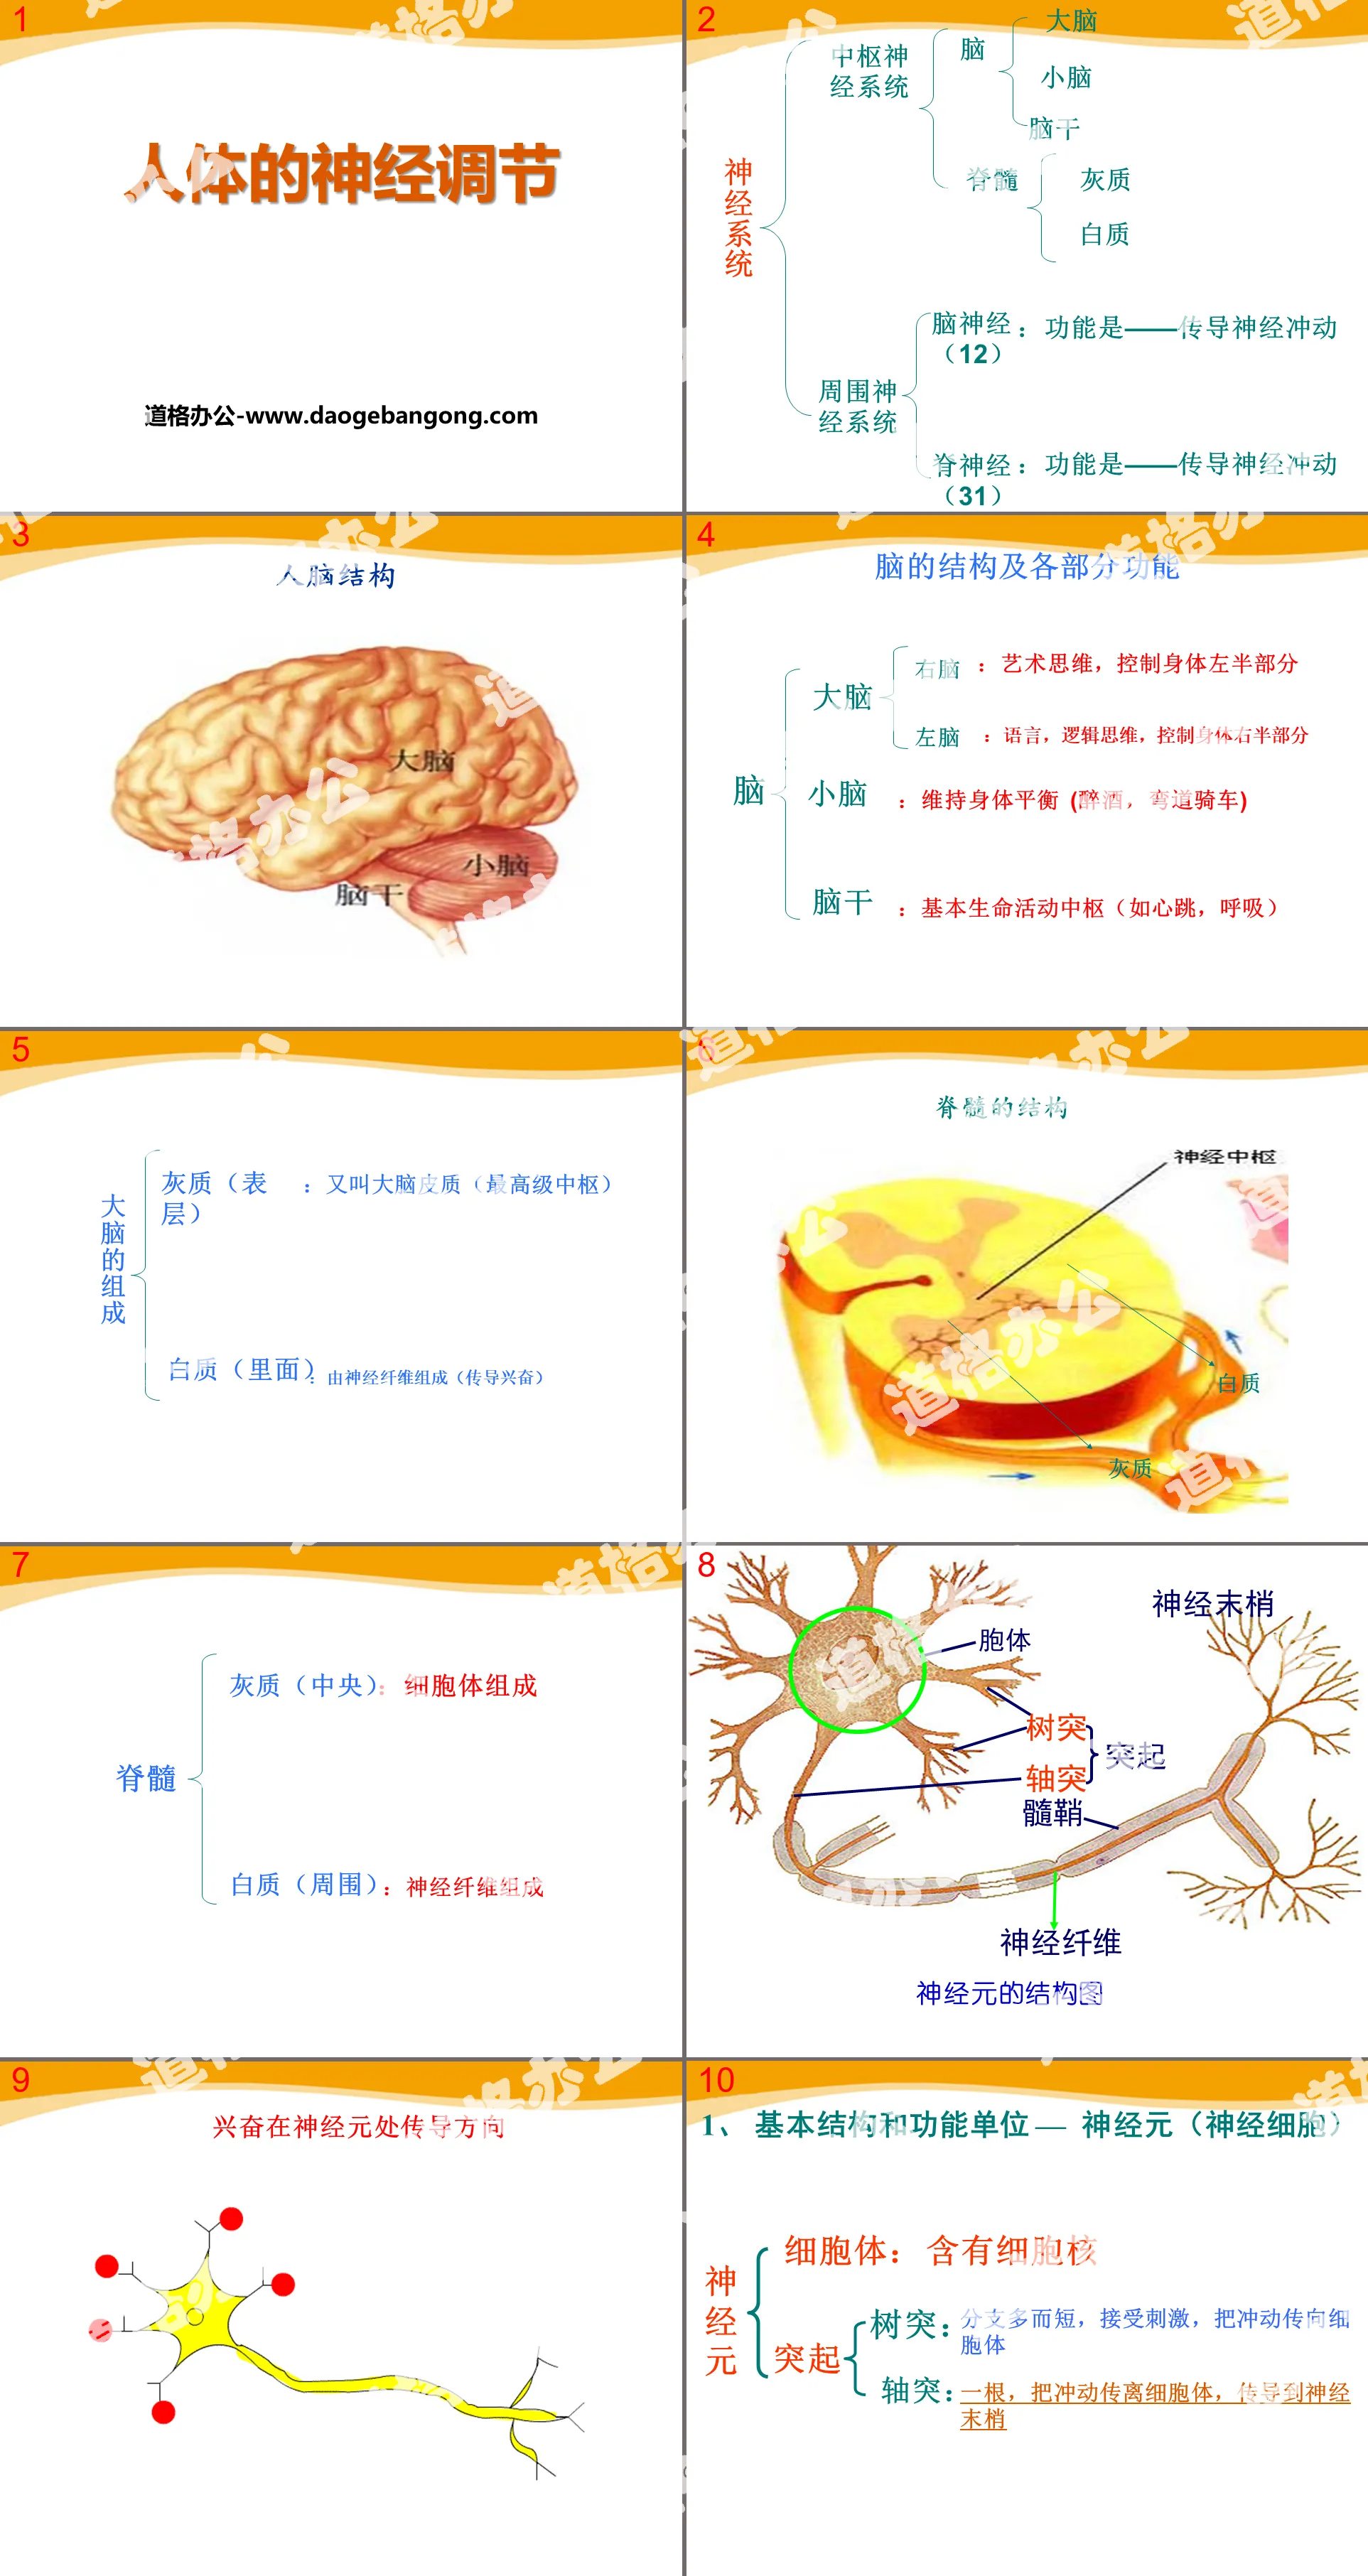 "Neural Regulation of the Human Body" PPT courseware